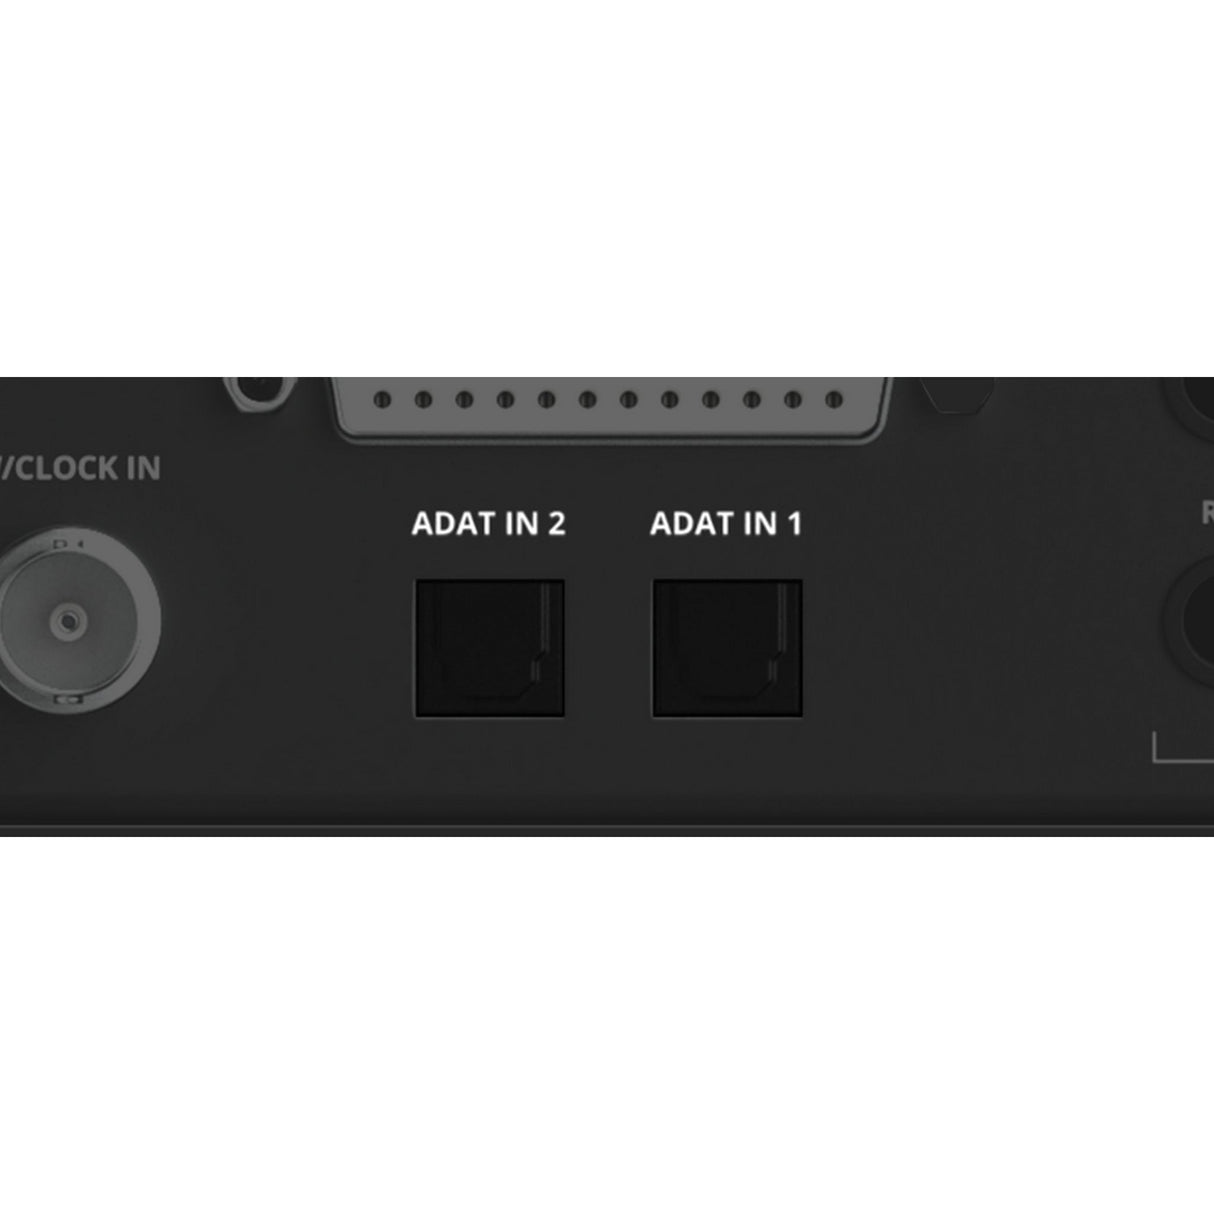 Audient ORIA Immersive USB-C Audio Interface and Monitor Controller